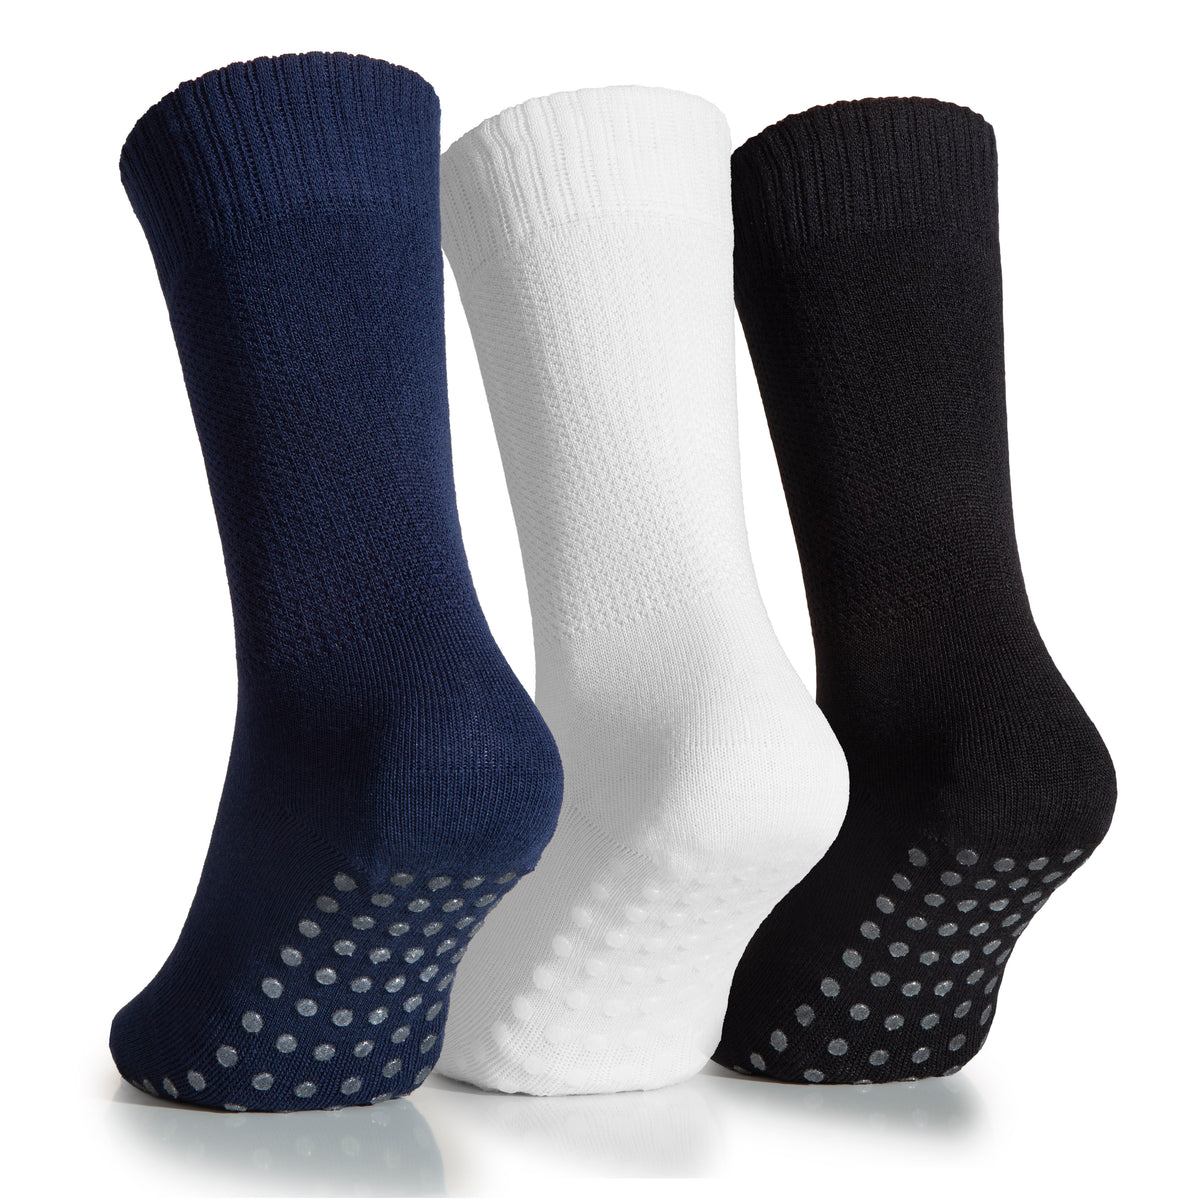 Displayed in the image are three pairs of Women's Bamboo Diabetic Ankle Socks with Non Slip Grip. The socks come in black, white, and blue, and feature dotted soles for improved traction.